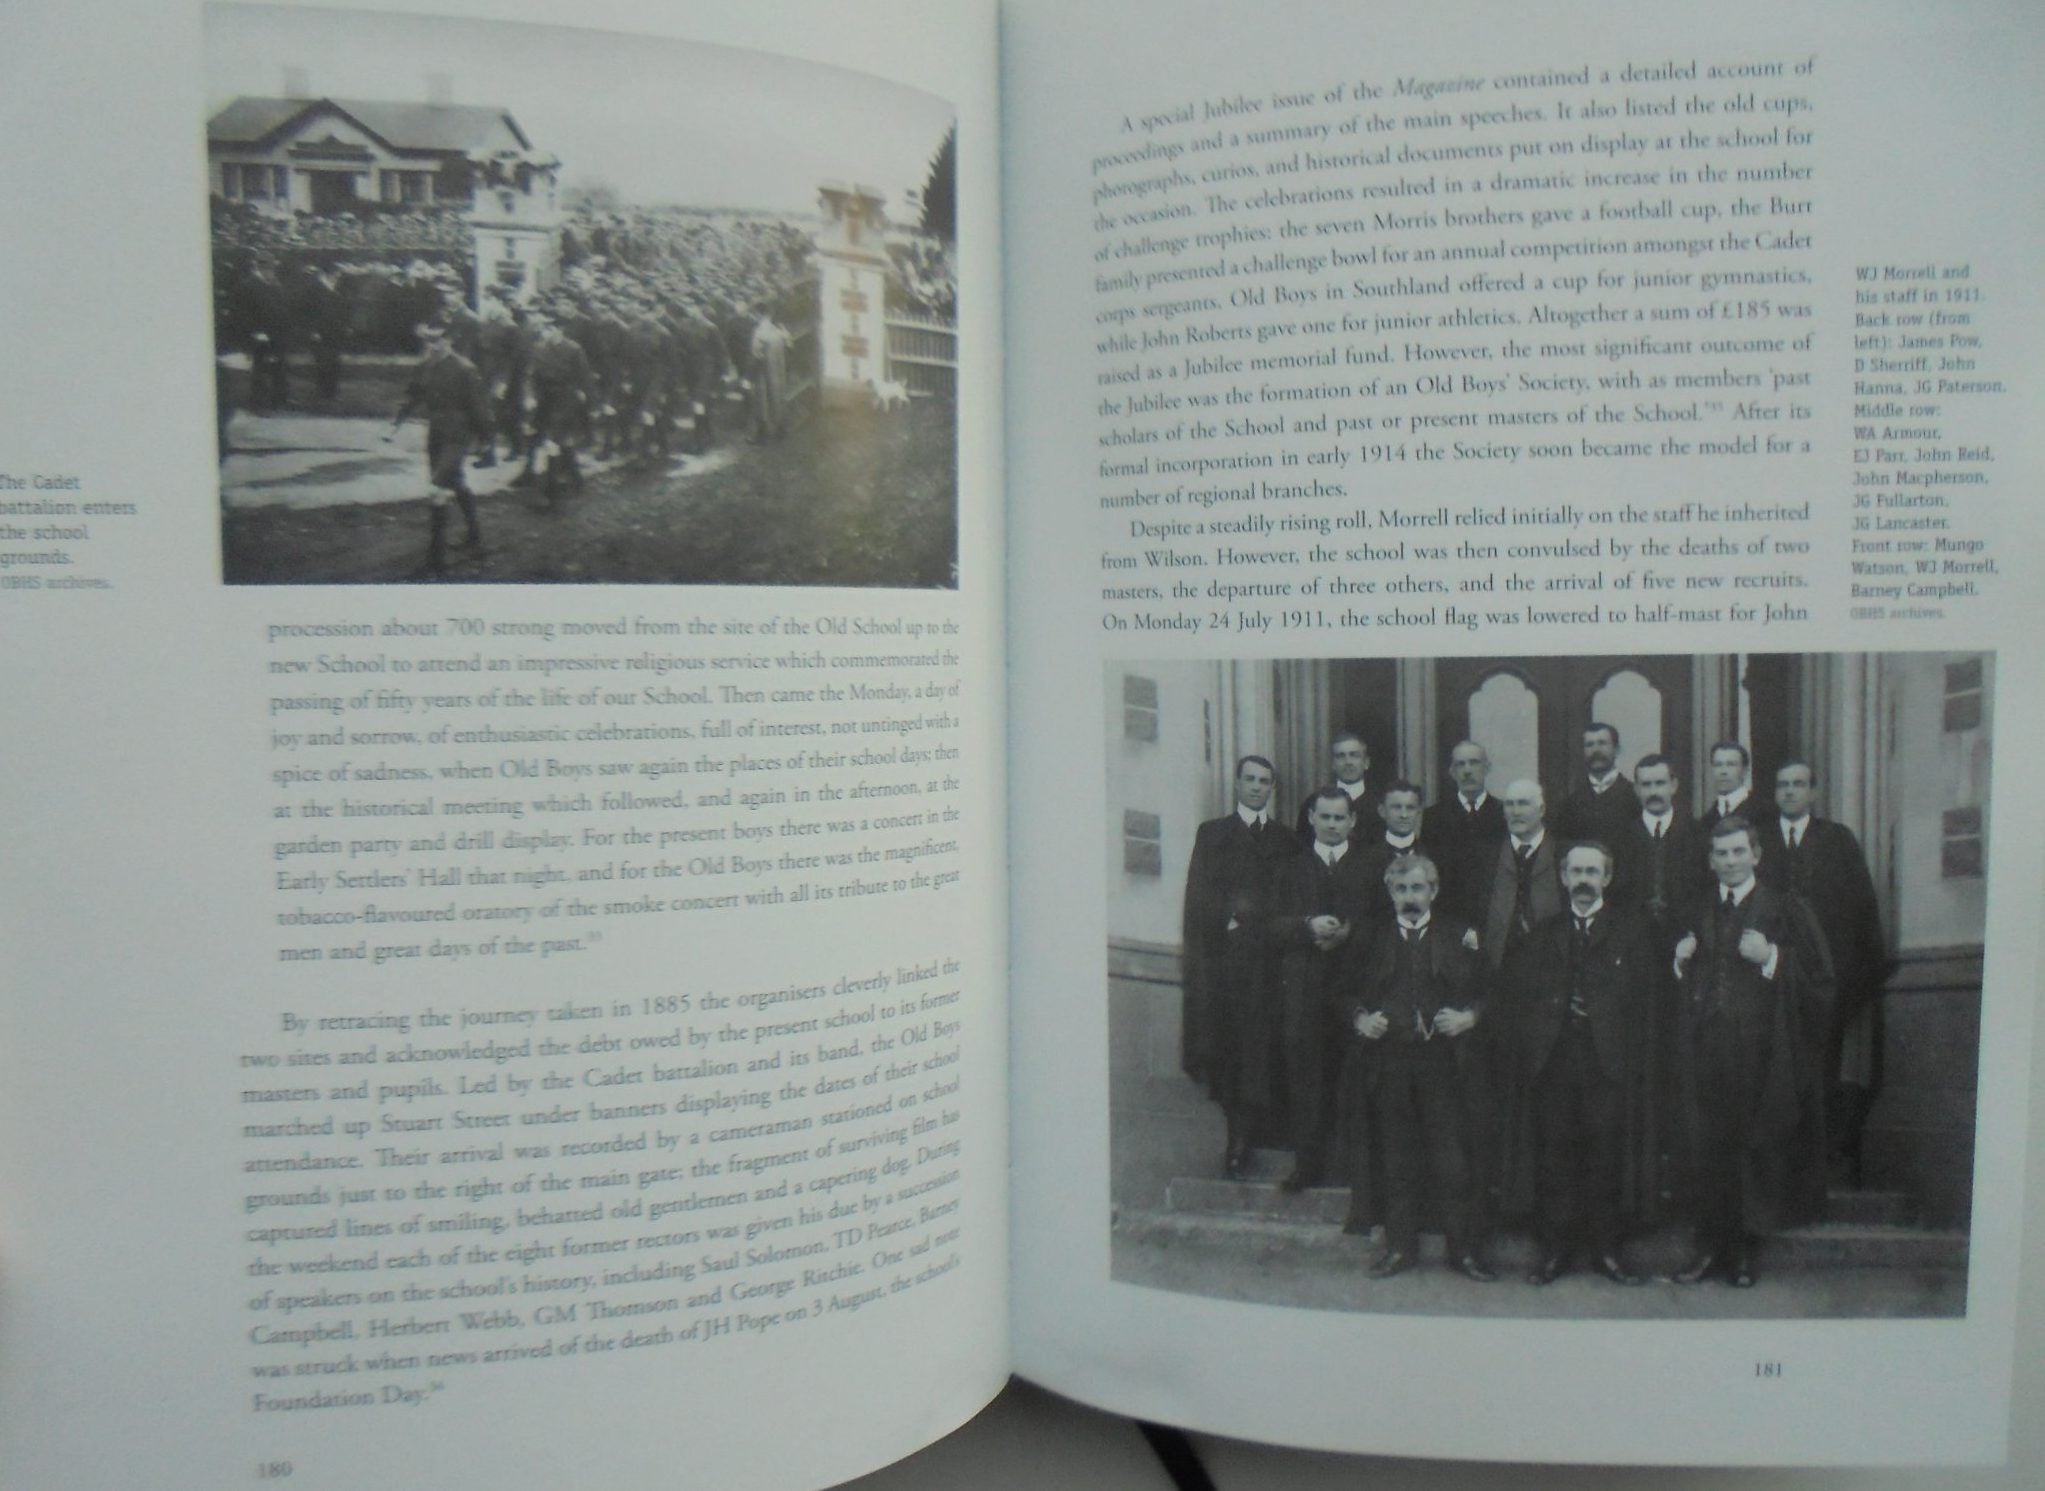 'Above the City' A History of Otago Boys' High School 1863-2013 By Rory Sweetman.